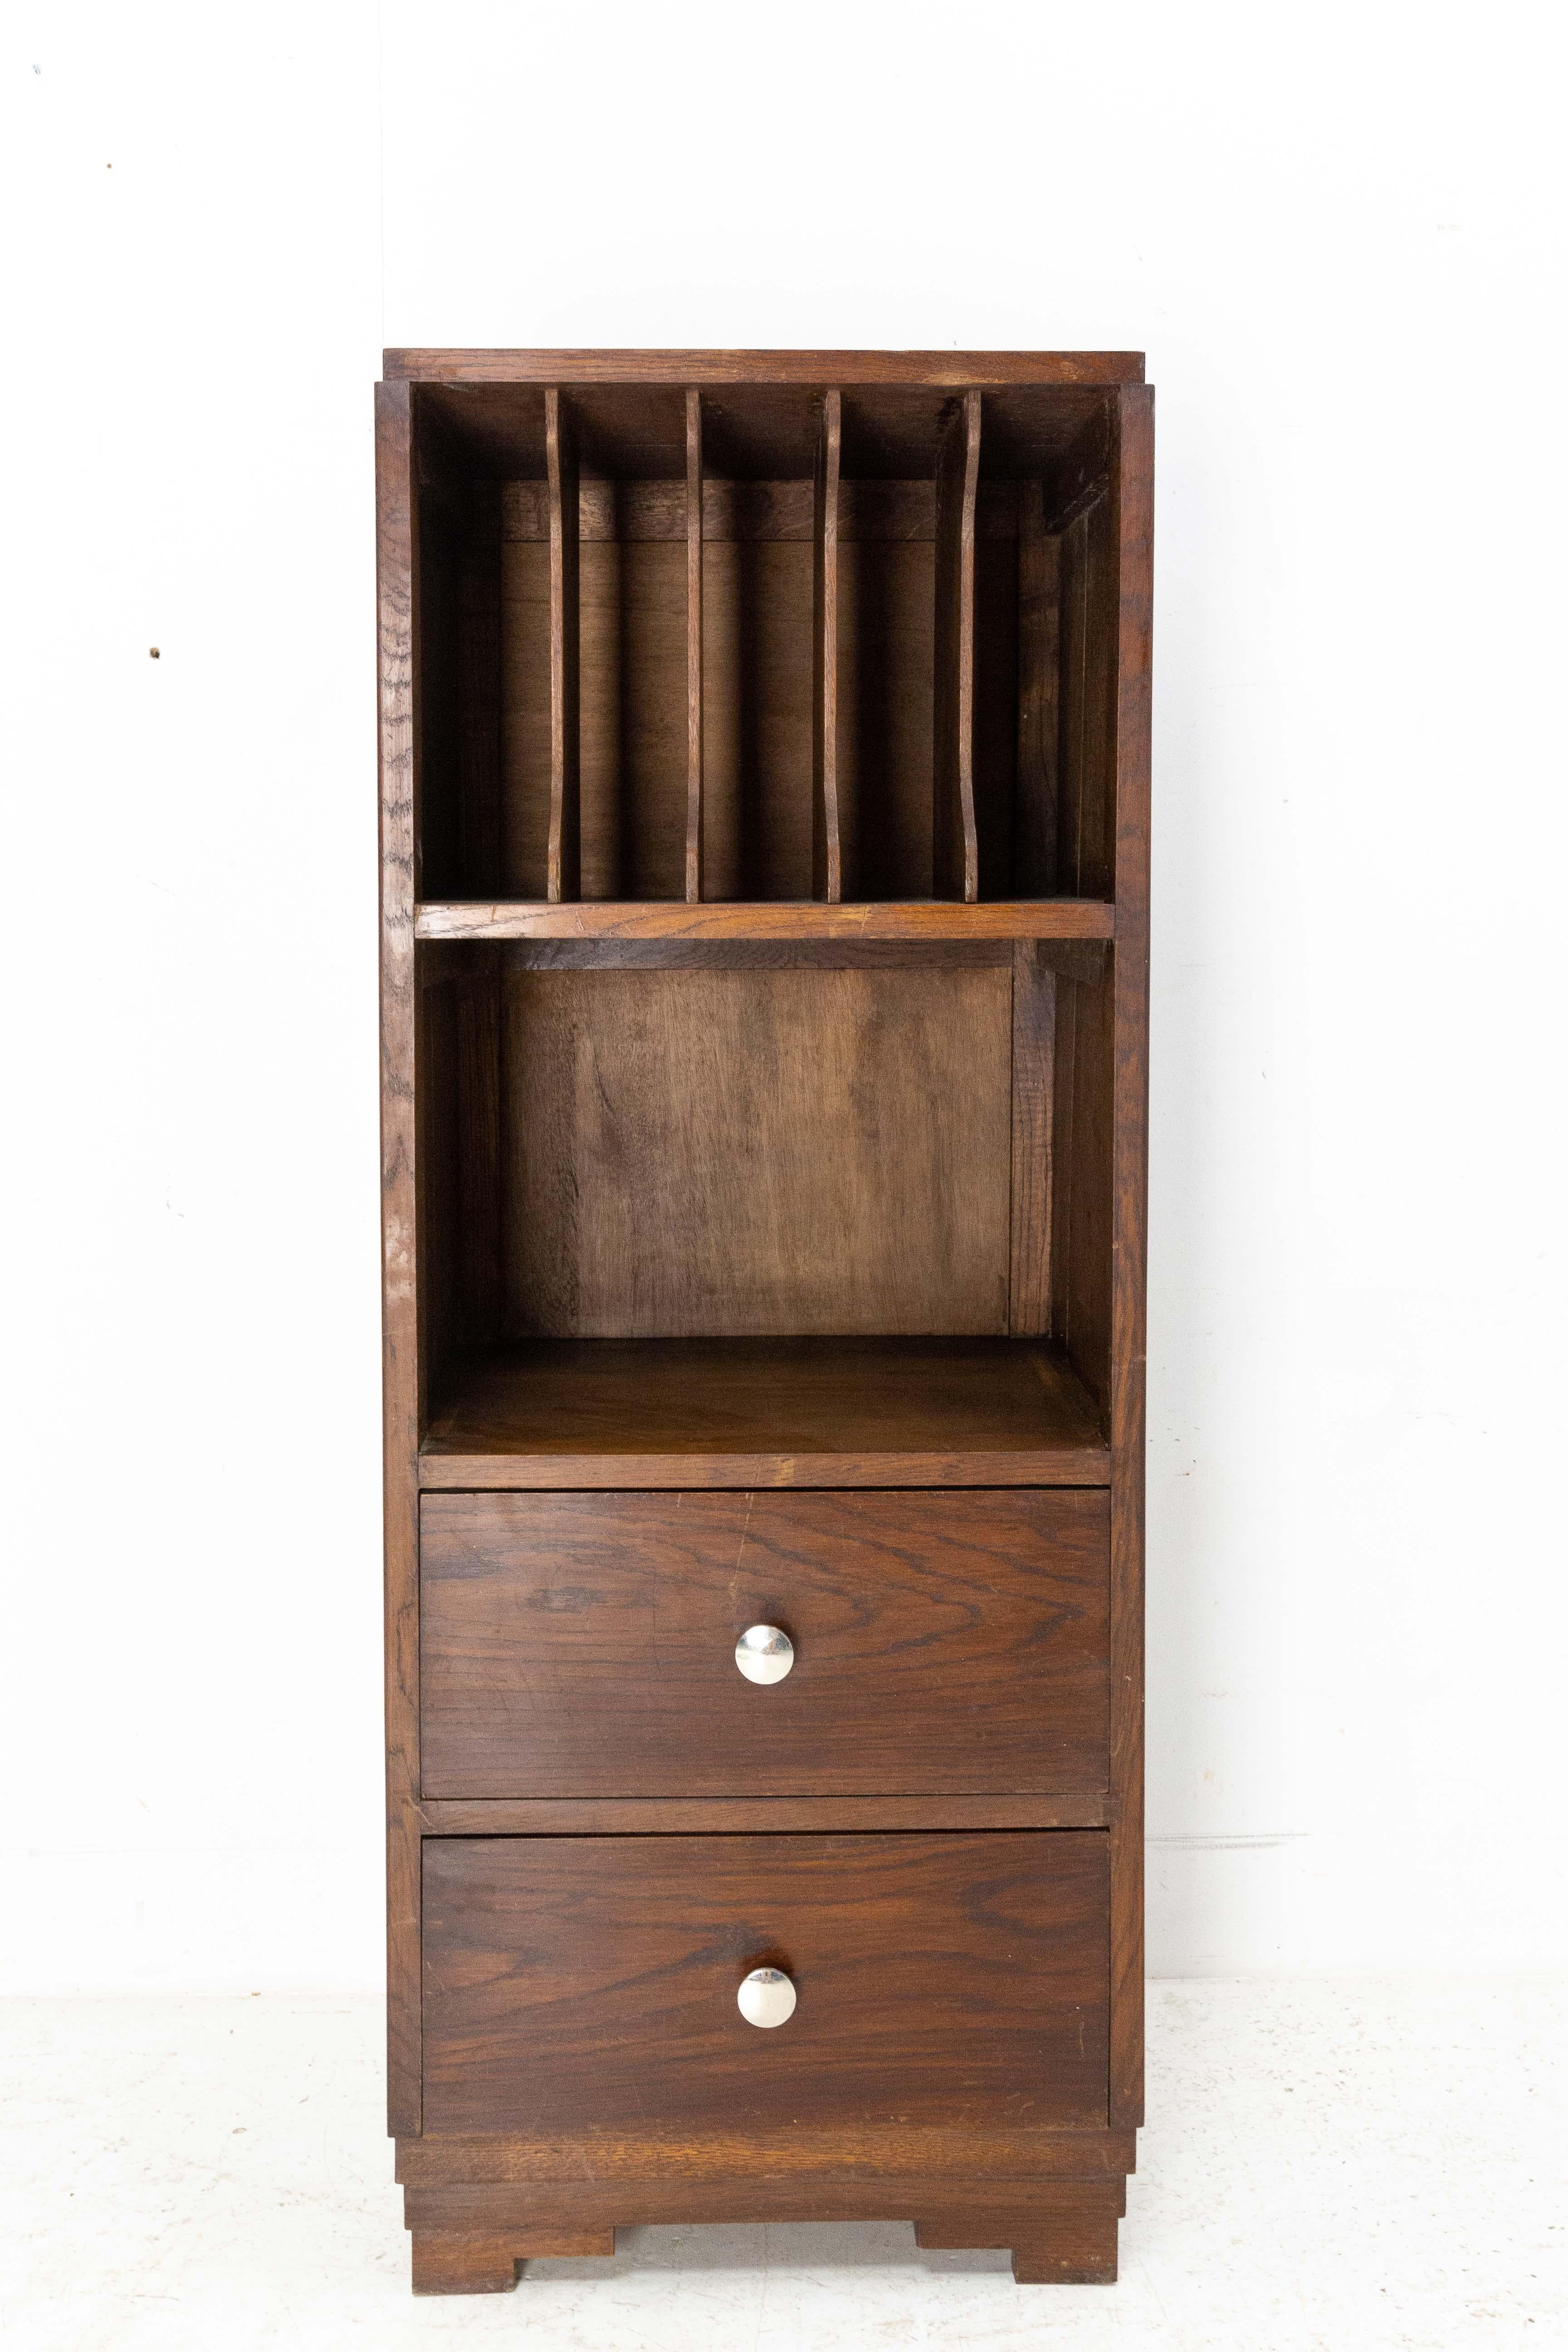 Midcentury French Desk Cabinet, circa 1940
Solid oak
Ideal for office storage : one part to store documents in binders, one part can be used as a shelf and two drawers.
Good condition, slots on the sides have been restored.

Shipping: 
L52 P40